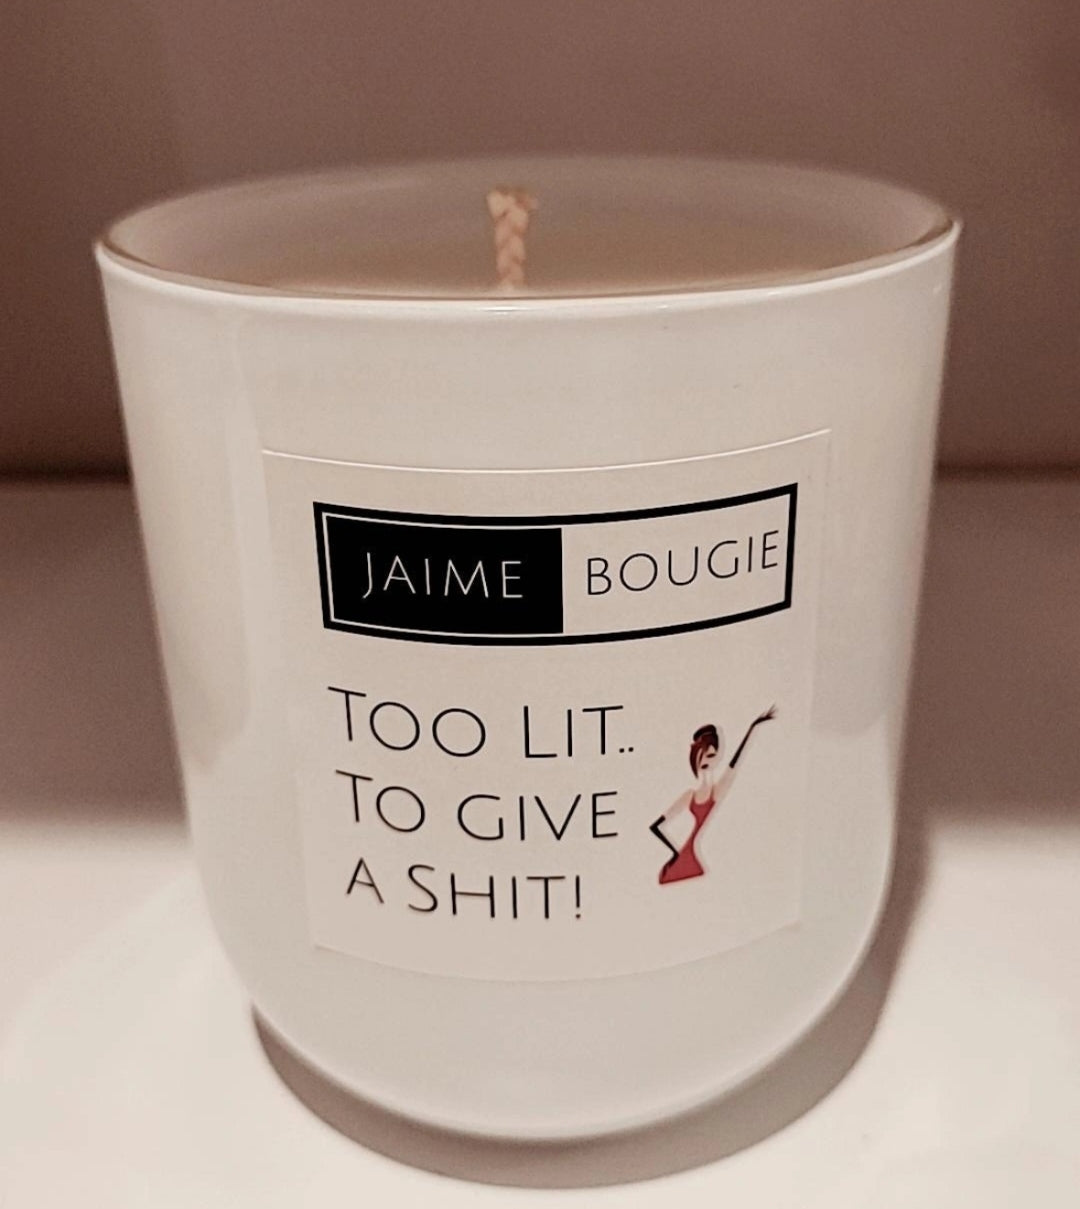 Too Lit To Give A Shit J'aime Bougie